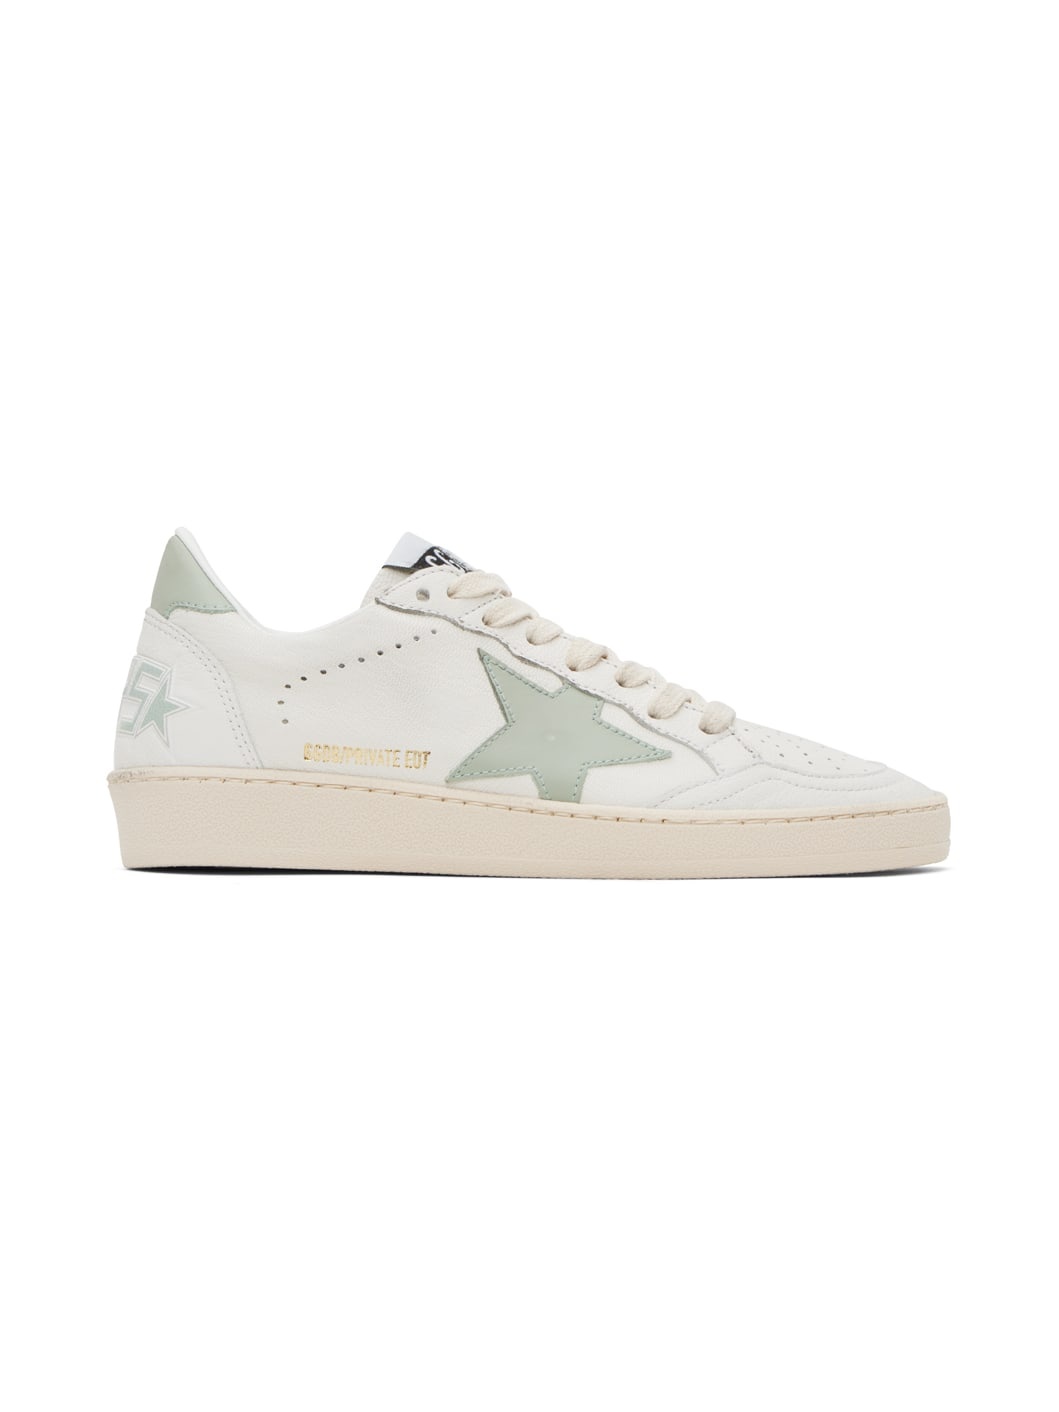 SSENSE Exclusive White & Green Ball Star Sneakers - 1